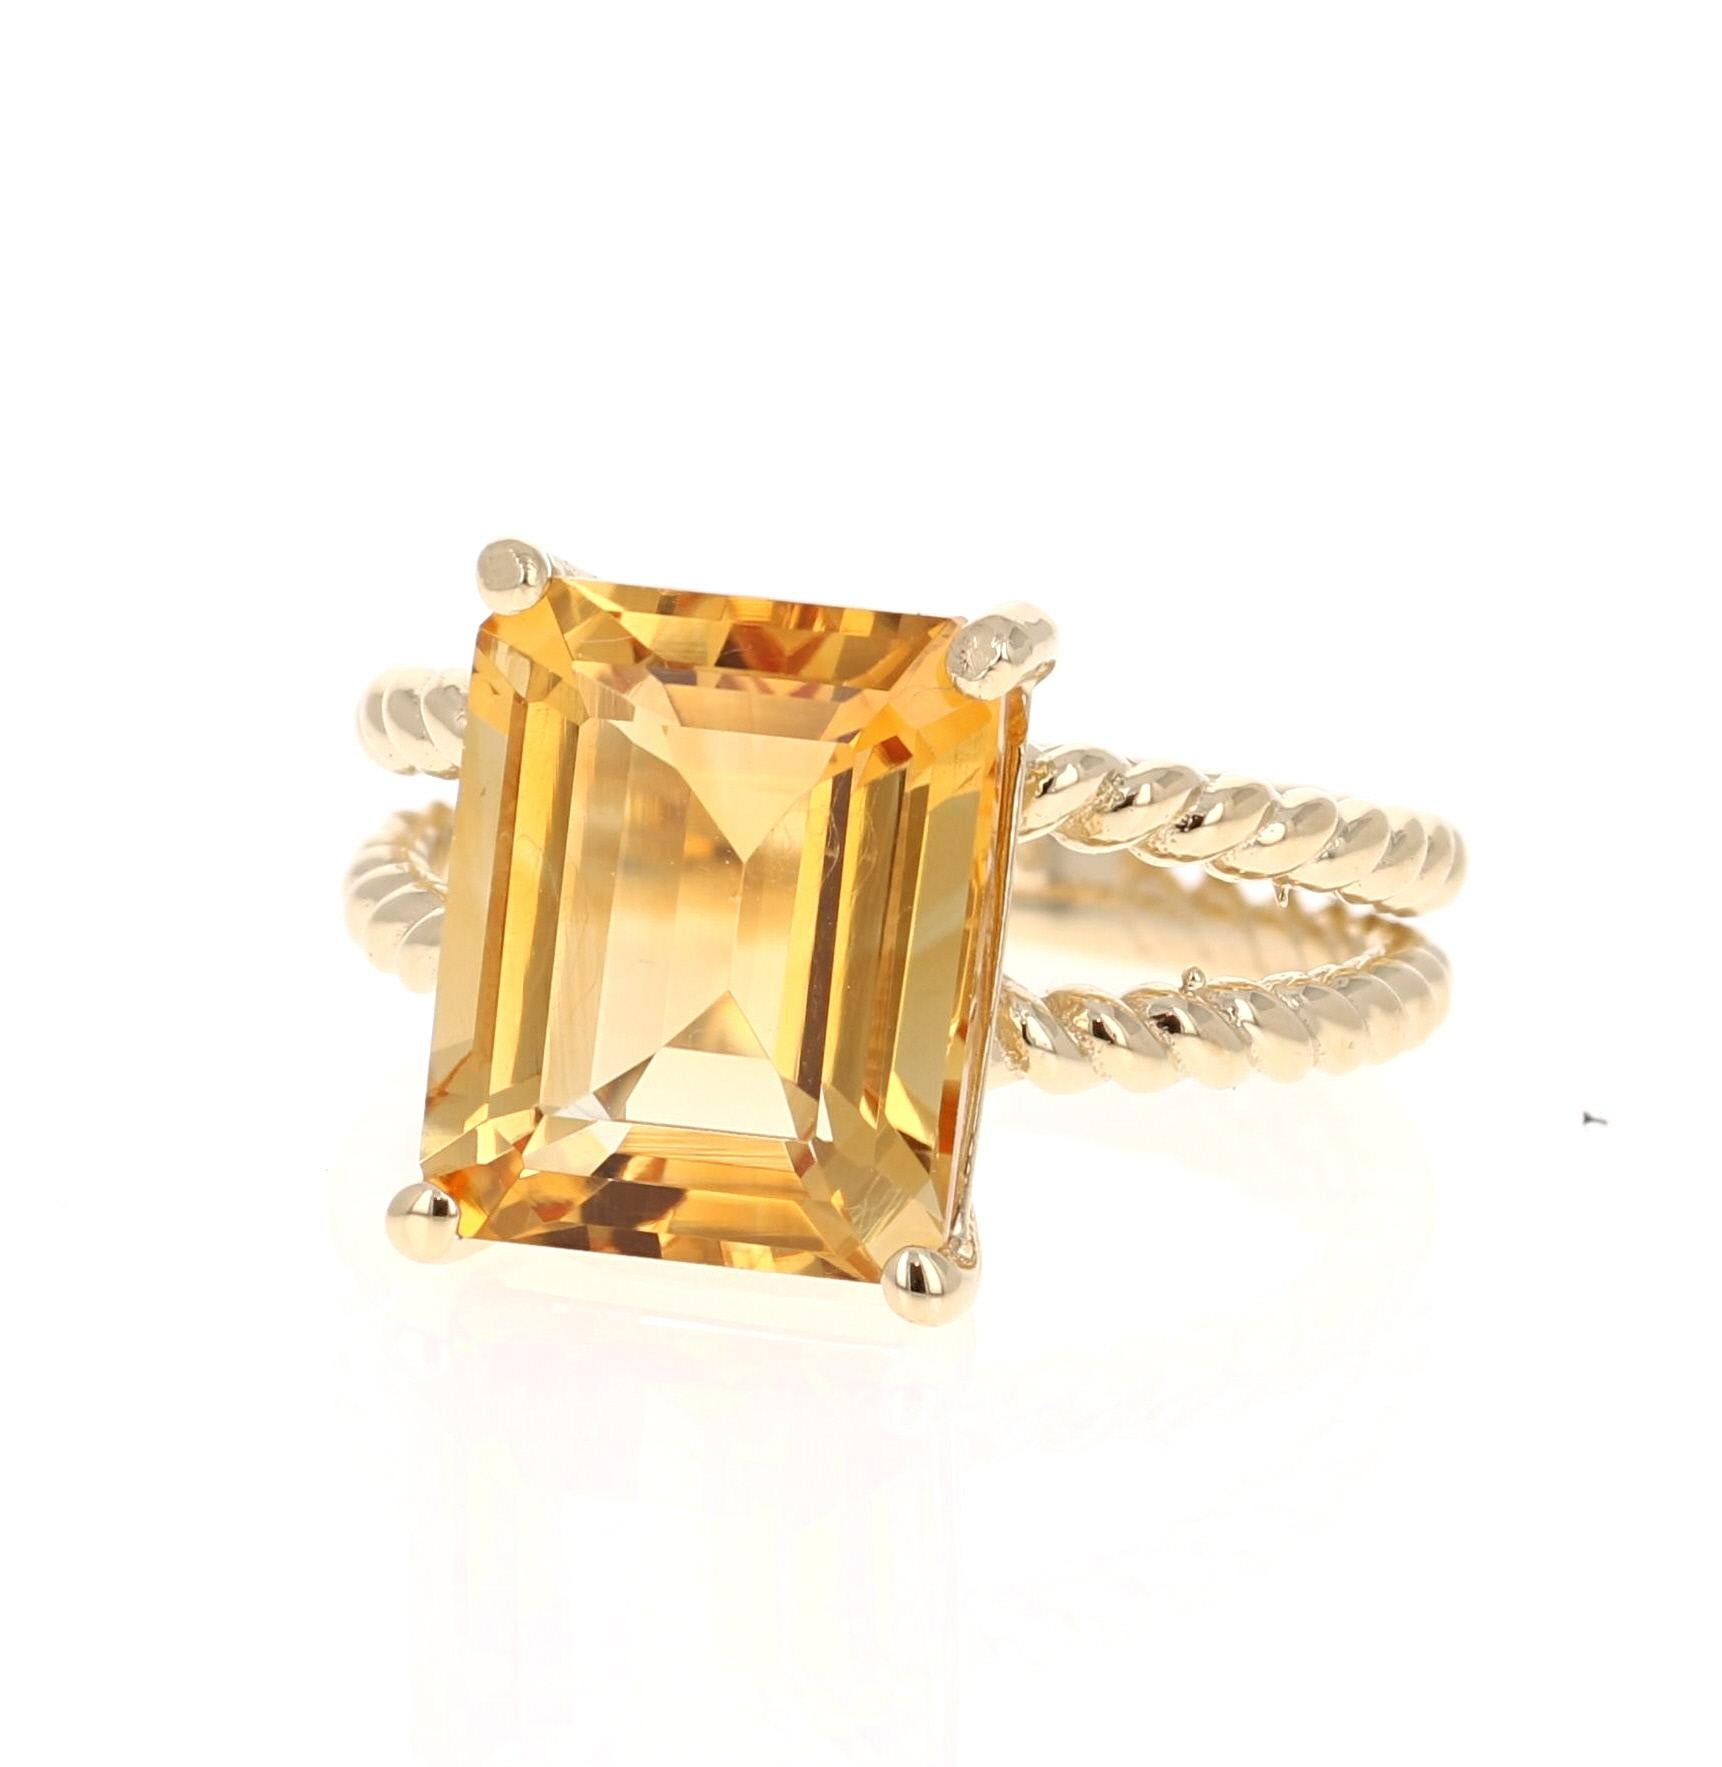 This beautiful, designer inspired ring has a bright and vivid Emerald Cut Citrine Quartz in the center that weighs 5.72 carats. 
The setting is beautifully crafted in 14K Yellow Gold and weighs approximately 4.8 grams.
The ring is a size 7 and can